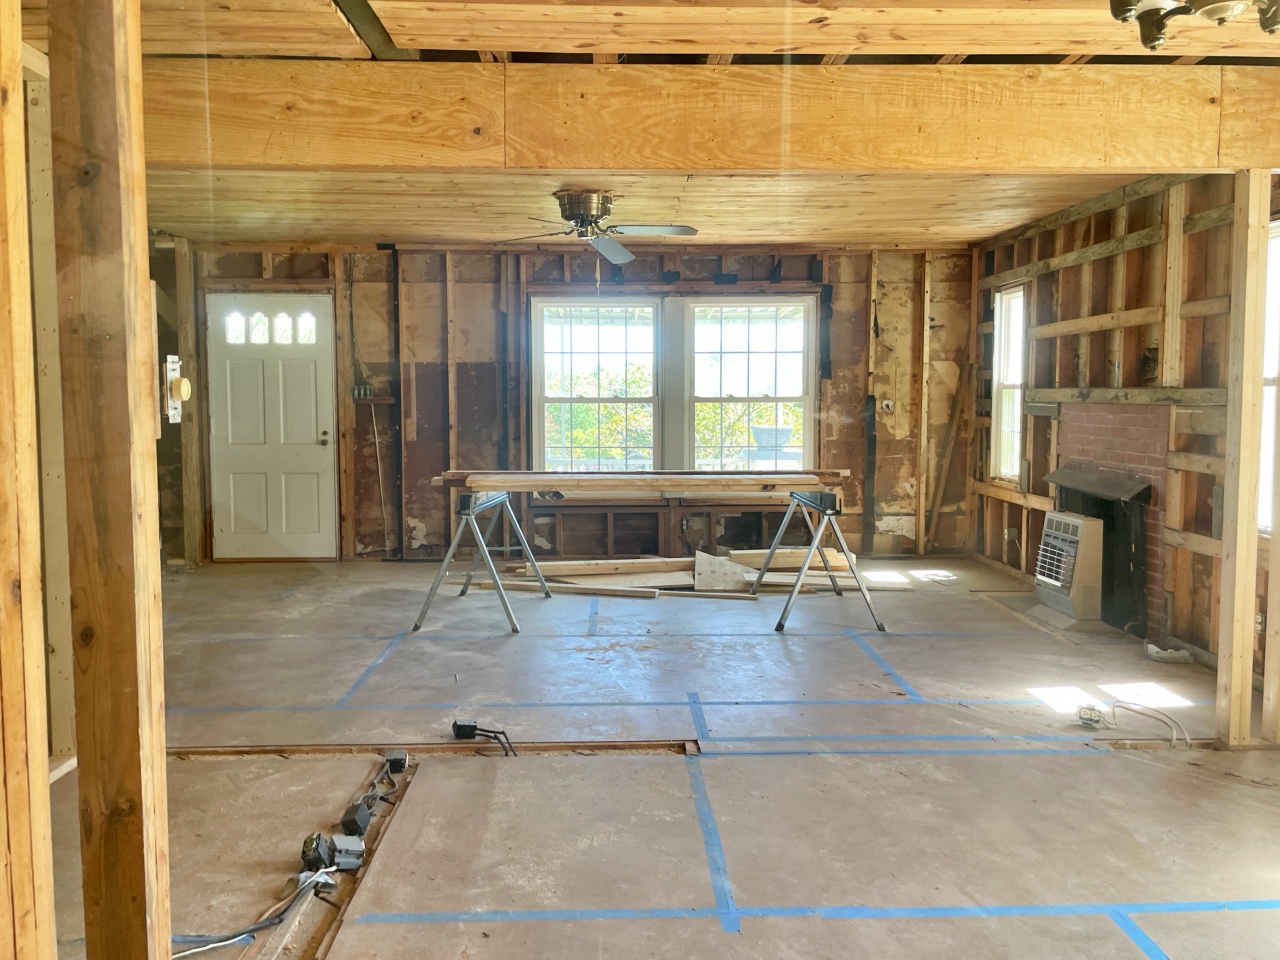 A large room under construction. The drywall has been removed, exposing the studs, and the floor is covered in protective panels. There is lumber on sawhorses in front of a double window.